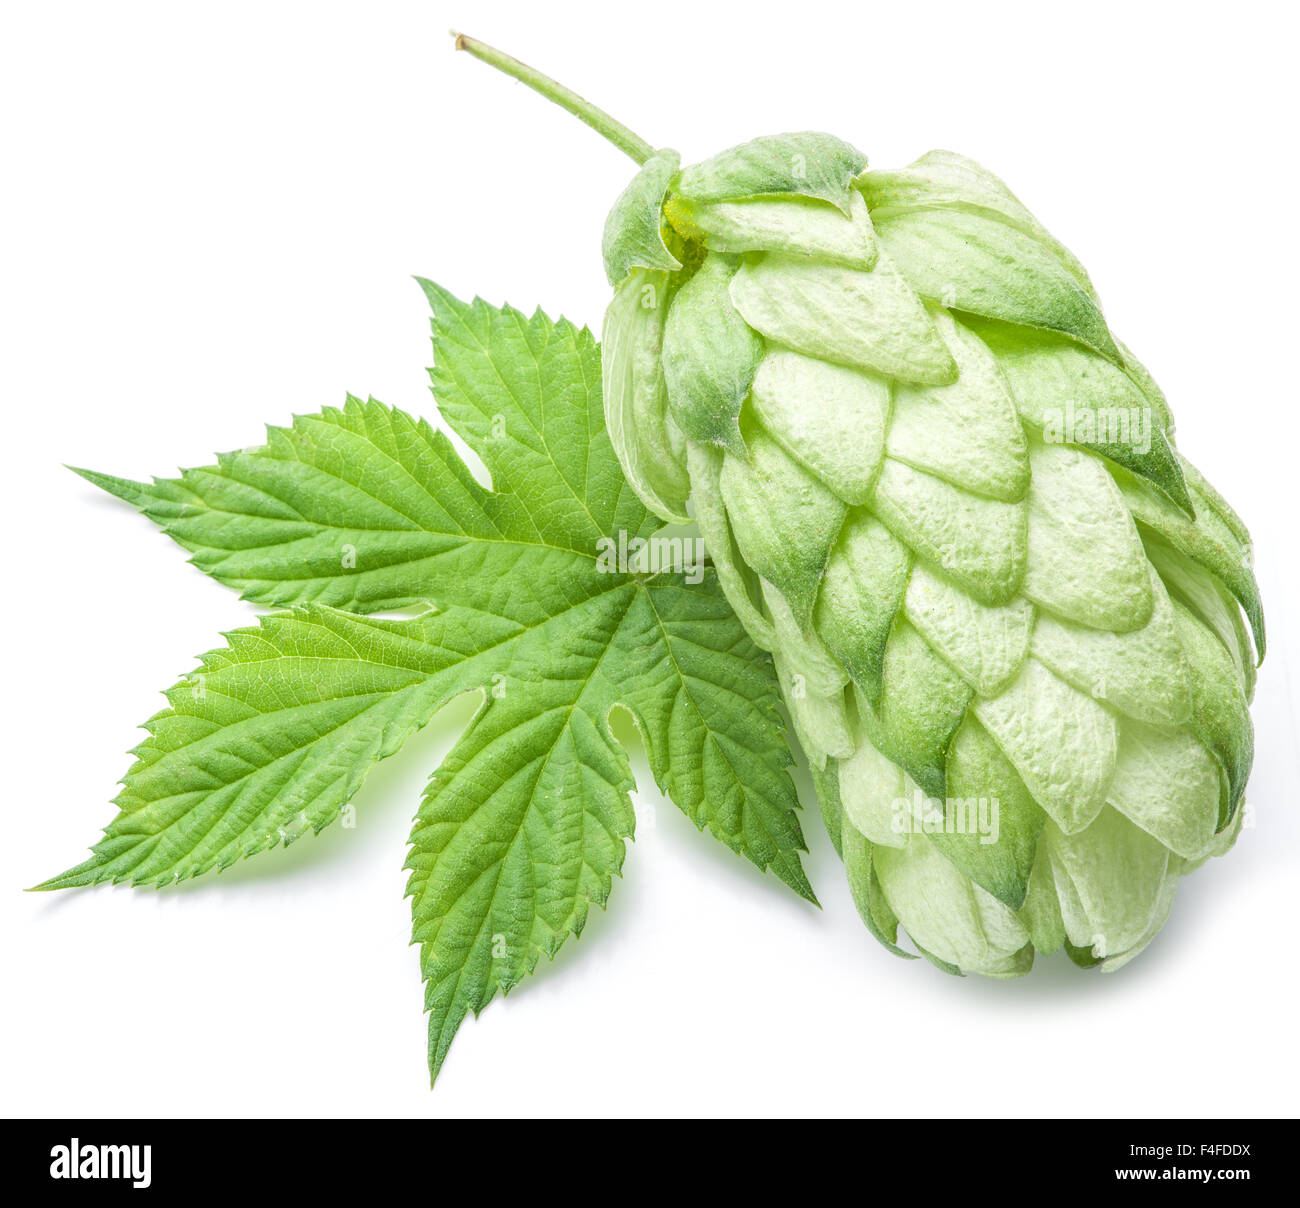 Hop cones. Isolated on white background. Stock Photo